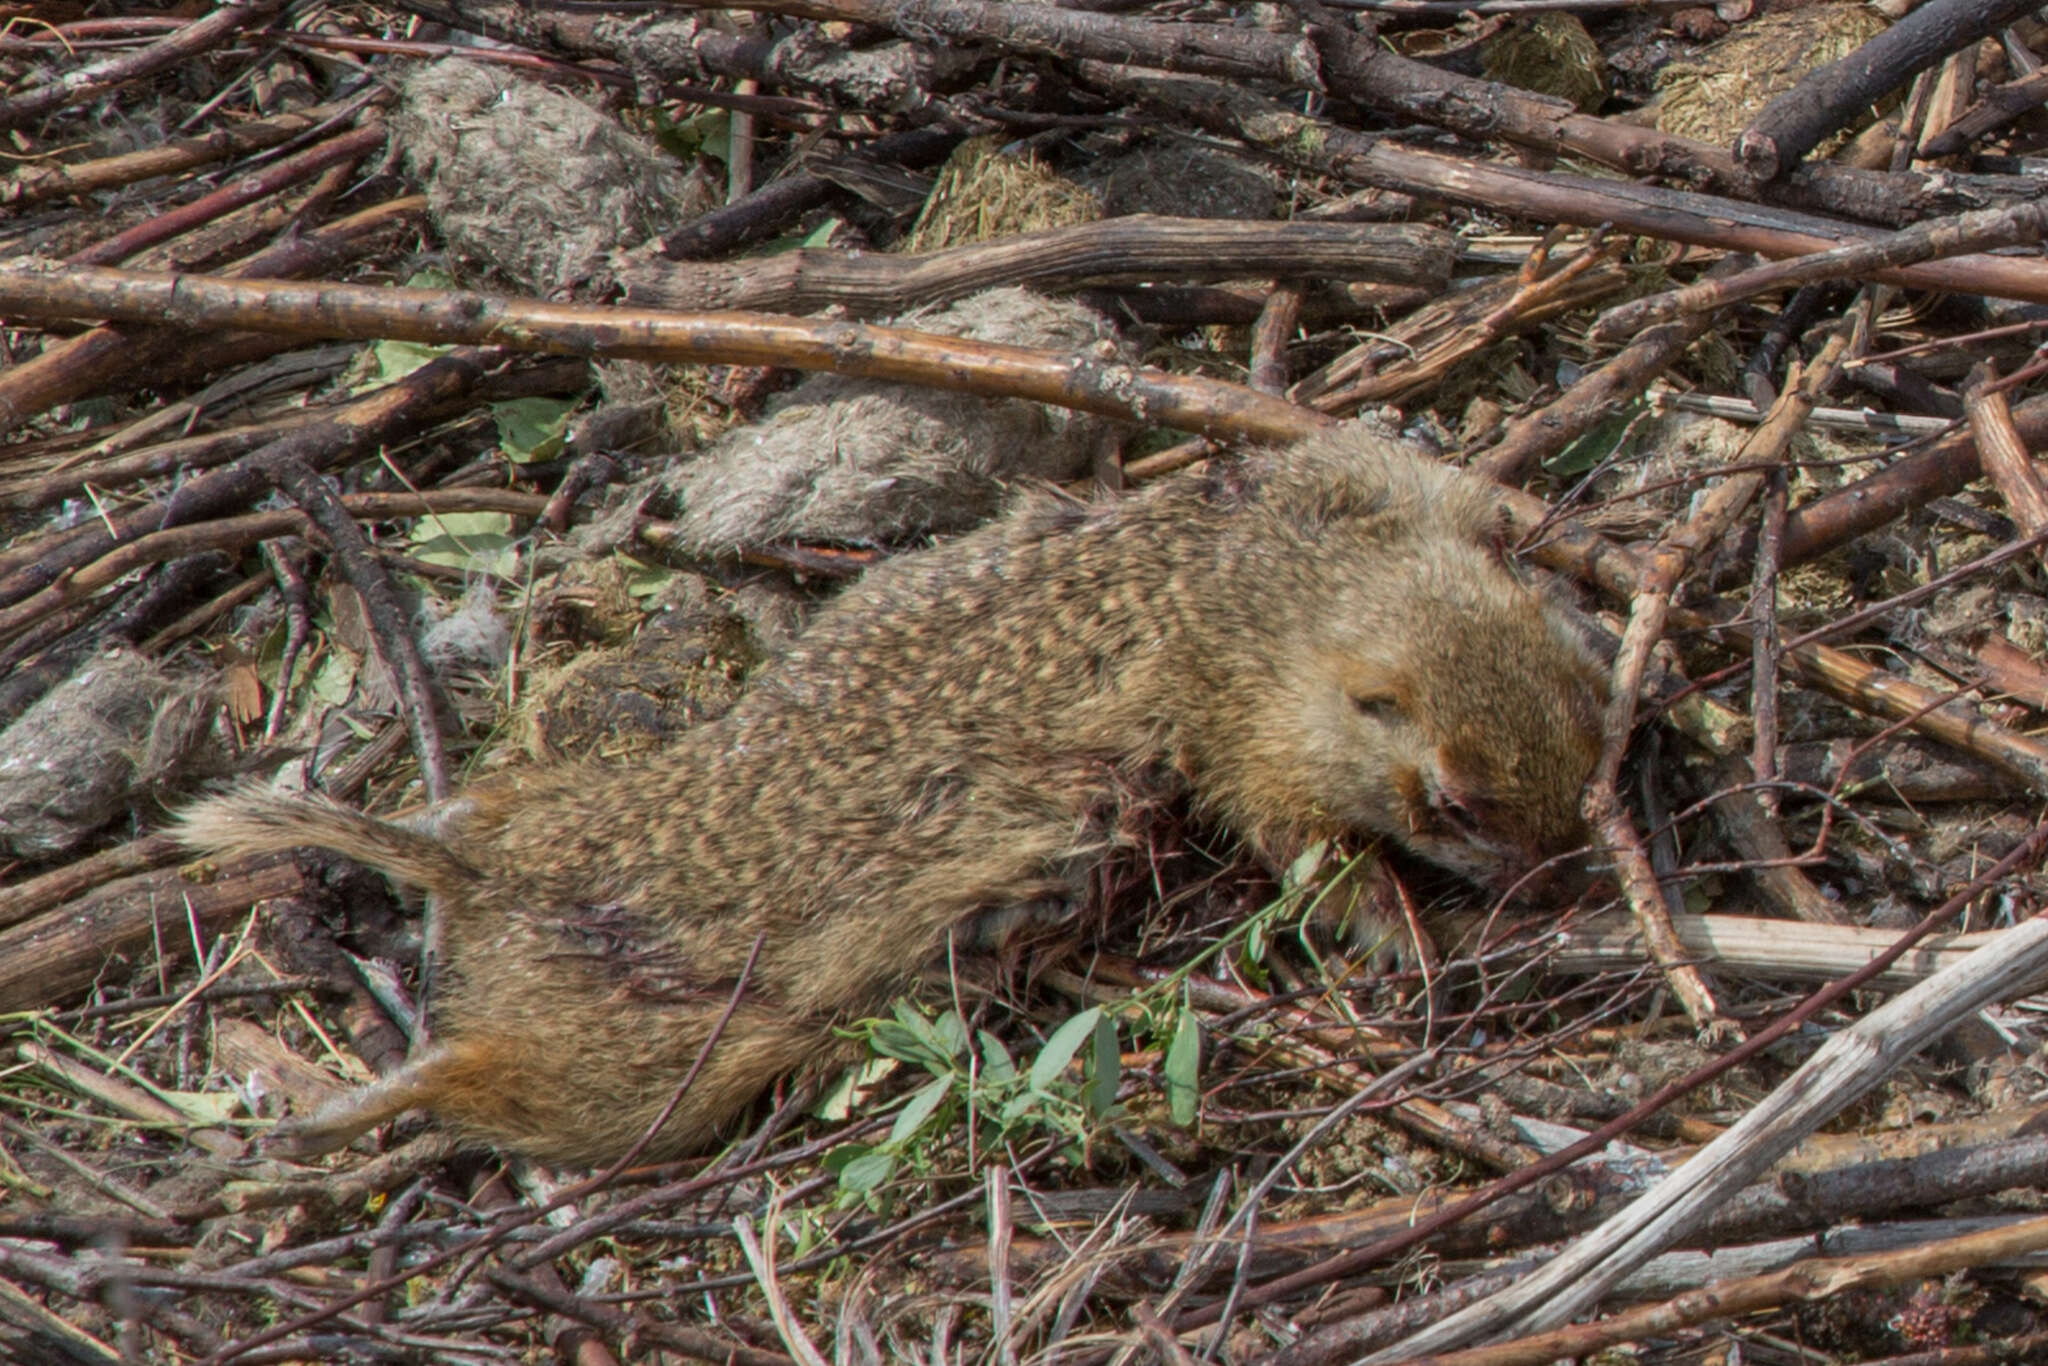 Image of Red-cheeked Ground Squirrel